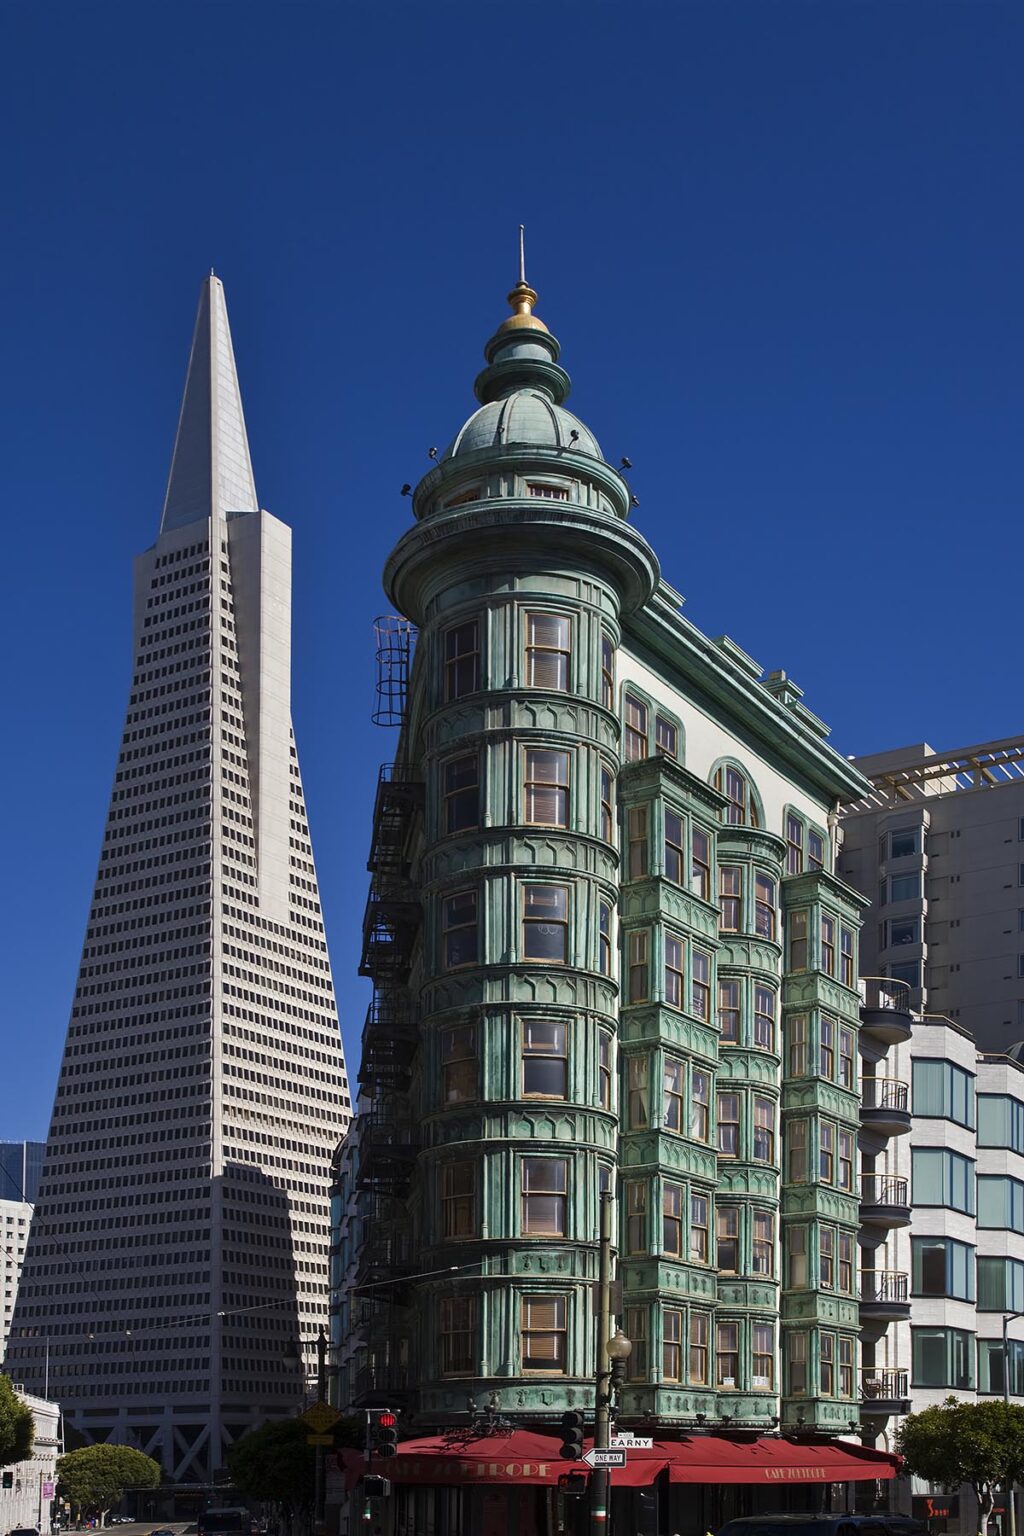 NORTH BEACH and the TRANSAMERICA BUILDING that stands 260 meters high and was designed by architect William Pereira - SAN FRANCISCO, CALIFORNIA